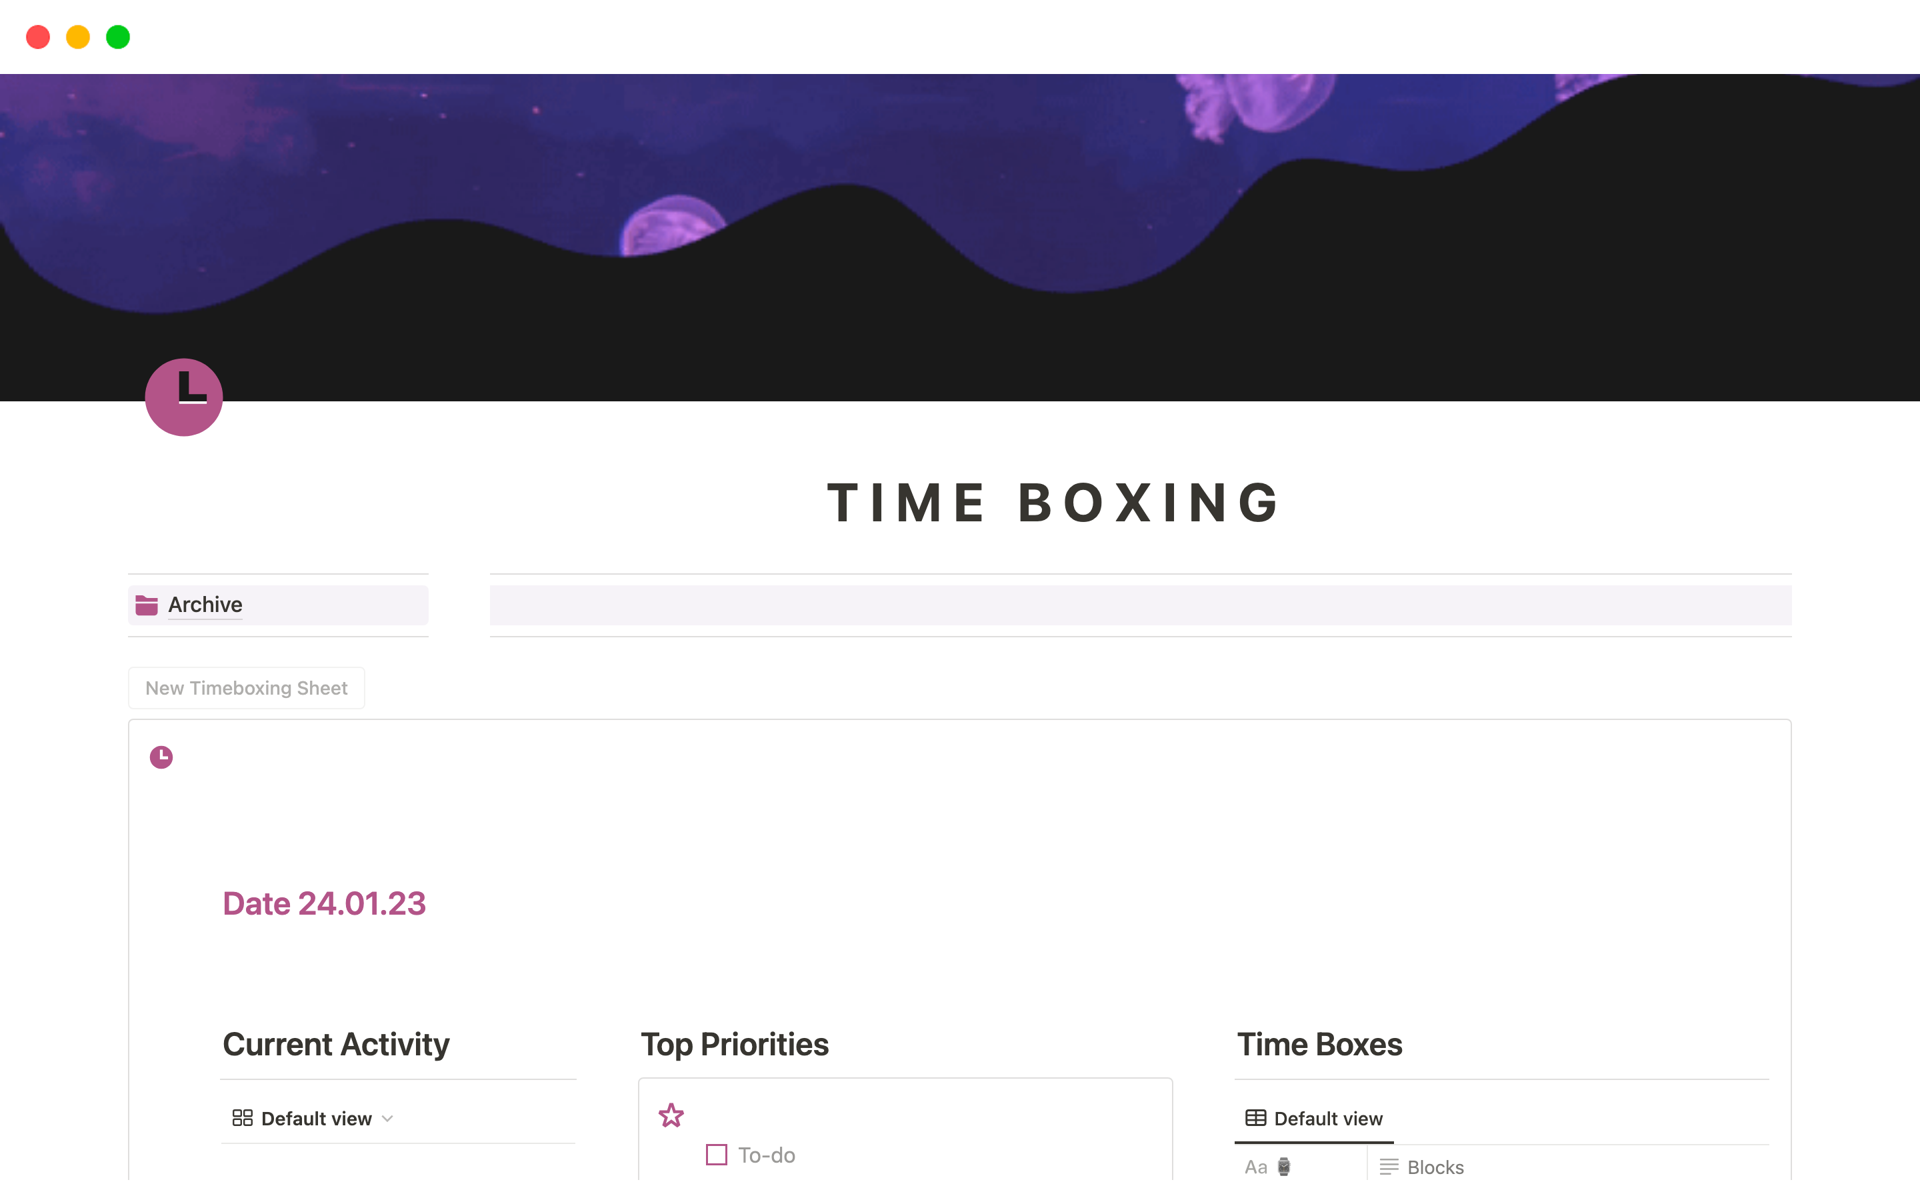 A template preview for Time Boxing Planner